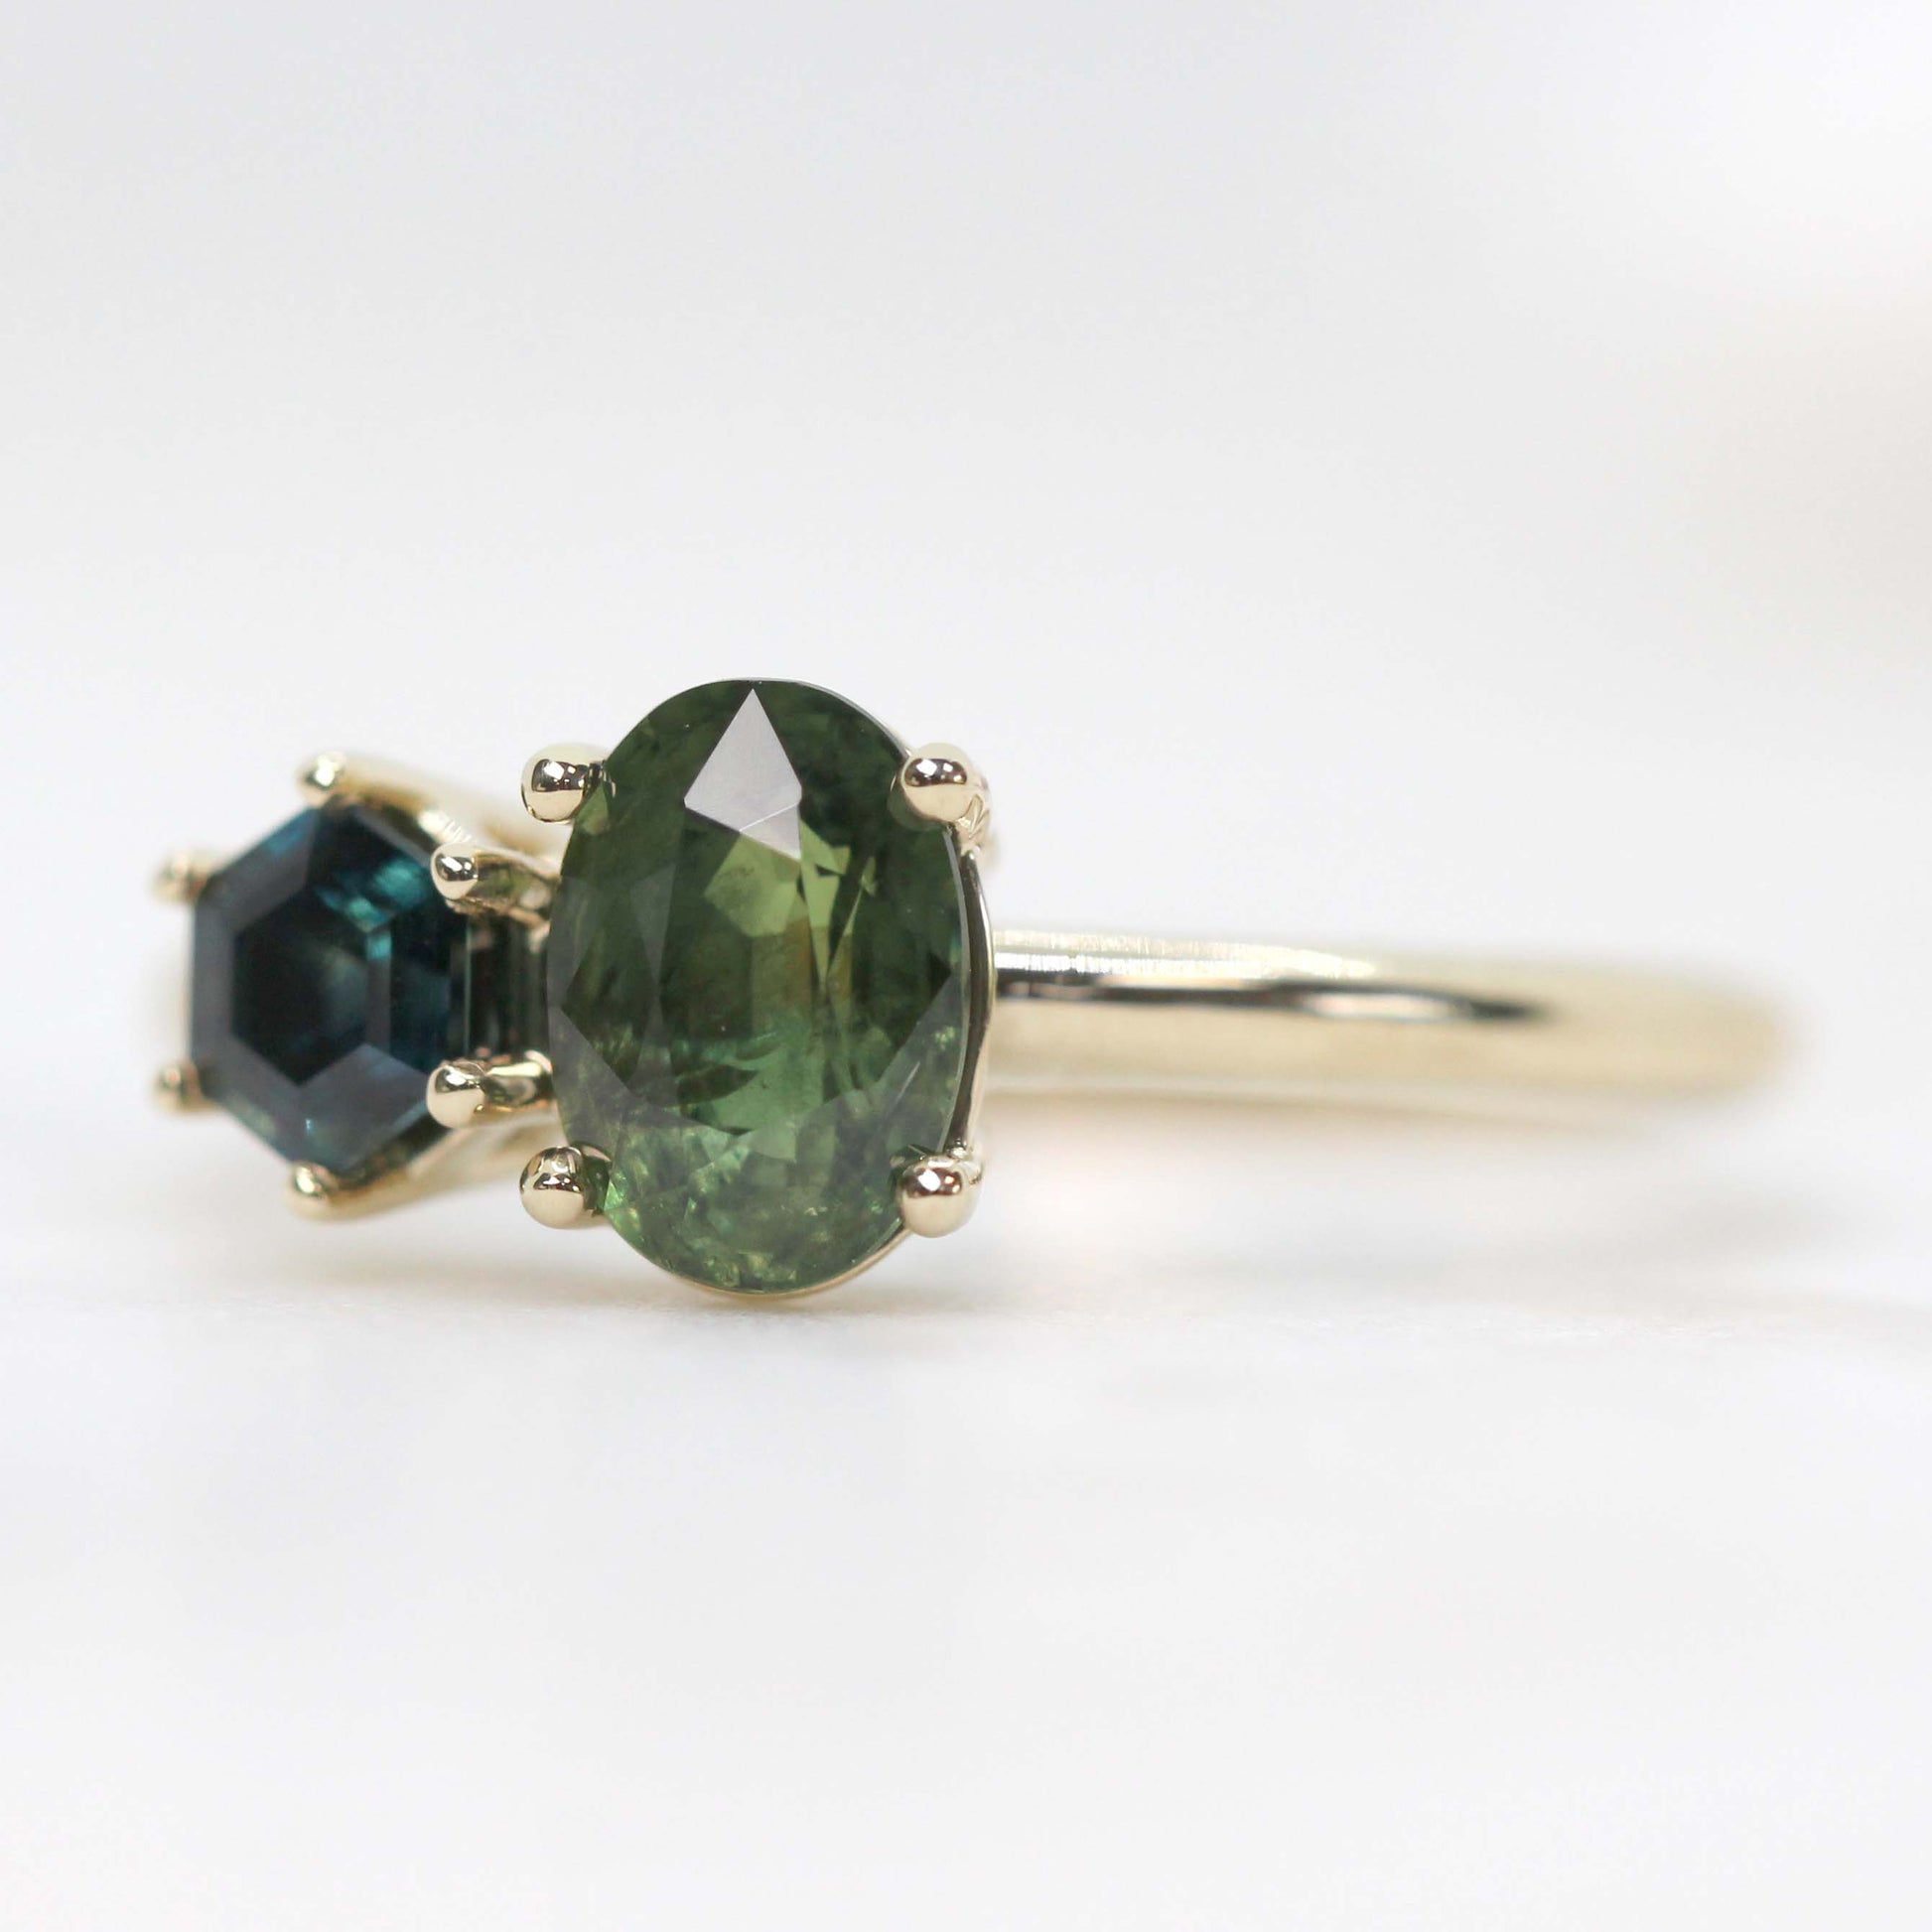 Toi et Moi Ring with a 1.42 Carat Green Oval Sapphire and a 0.66 Blue Hexagon Sapphire in 14k Yellow Gold - Ready to Size and Ship - Midwinter Co. Alternative Bridal Rings and Modern Fine Jewelry